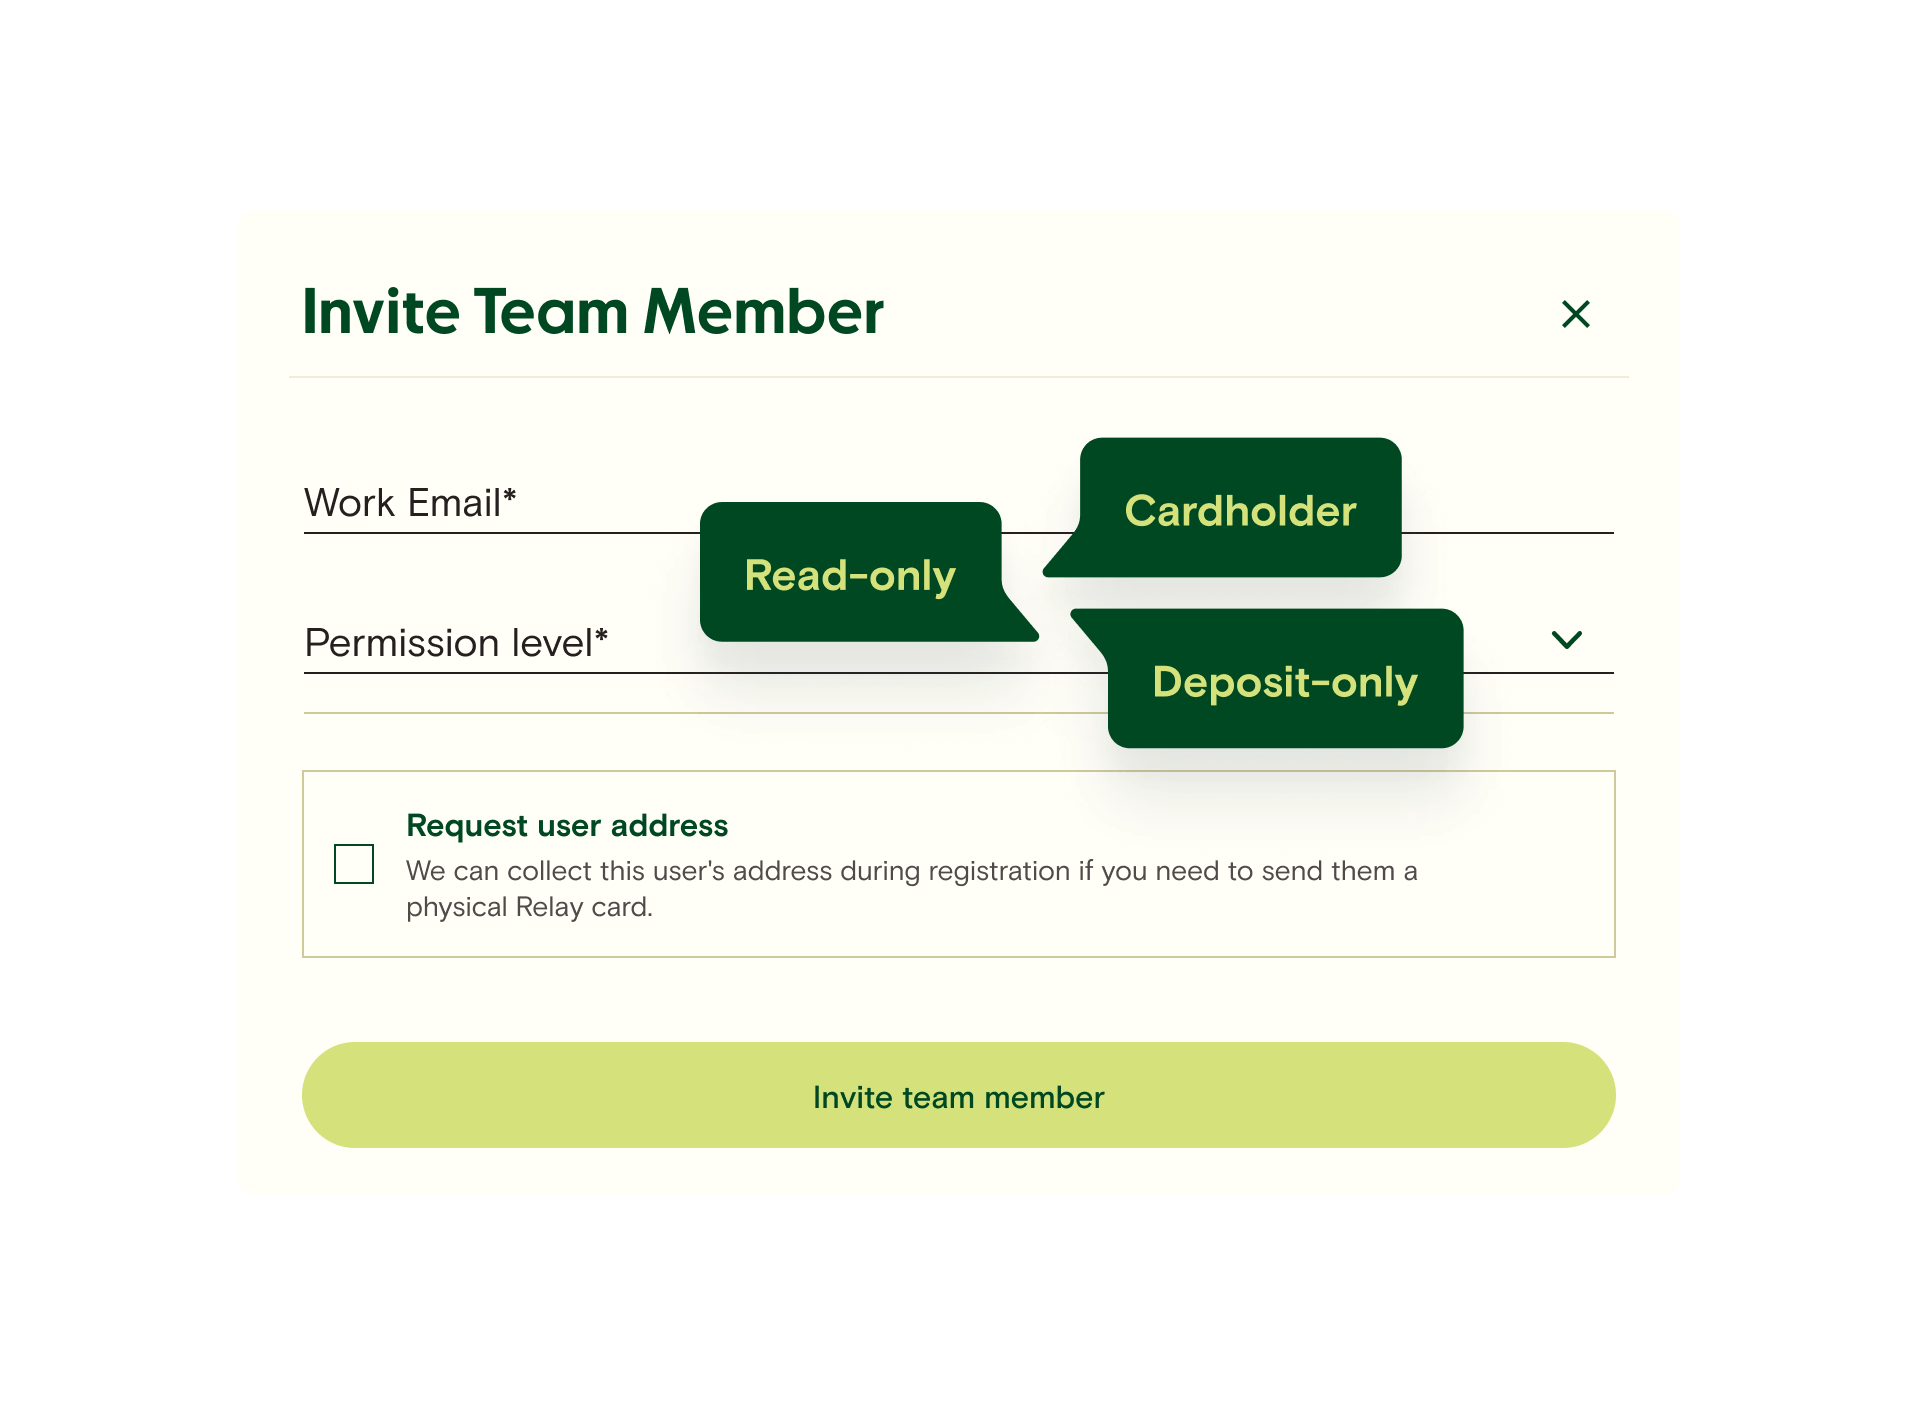 List of permission levels for inviting new team members to a Relay account. Options include Cardholder, Read-only, and Deposit-only.